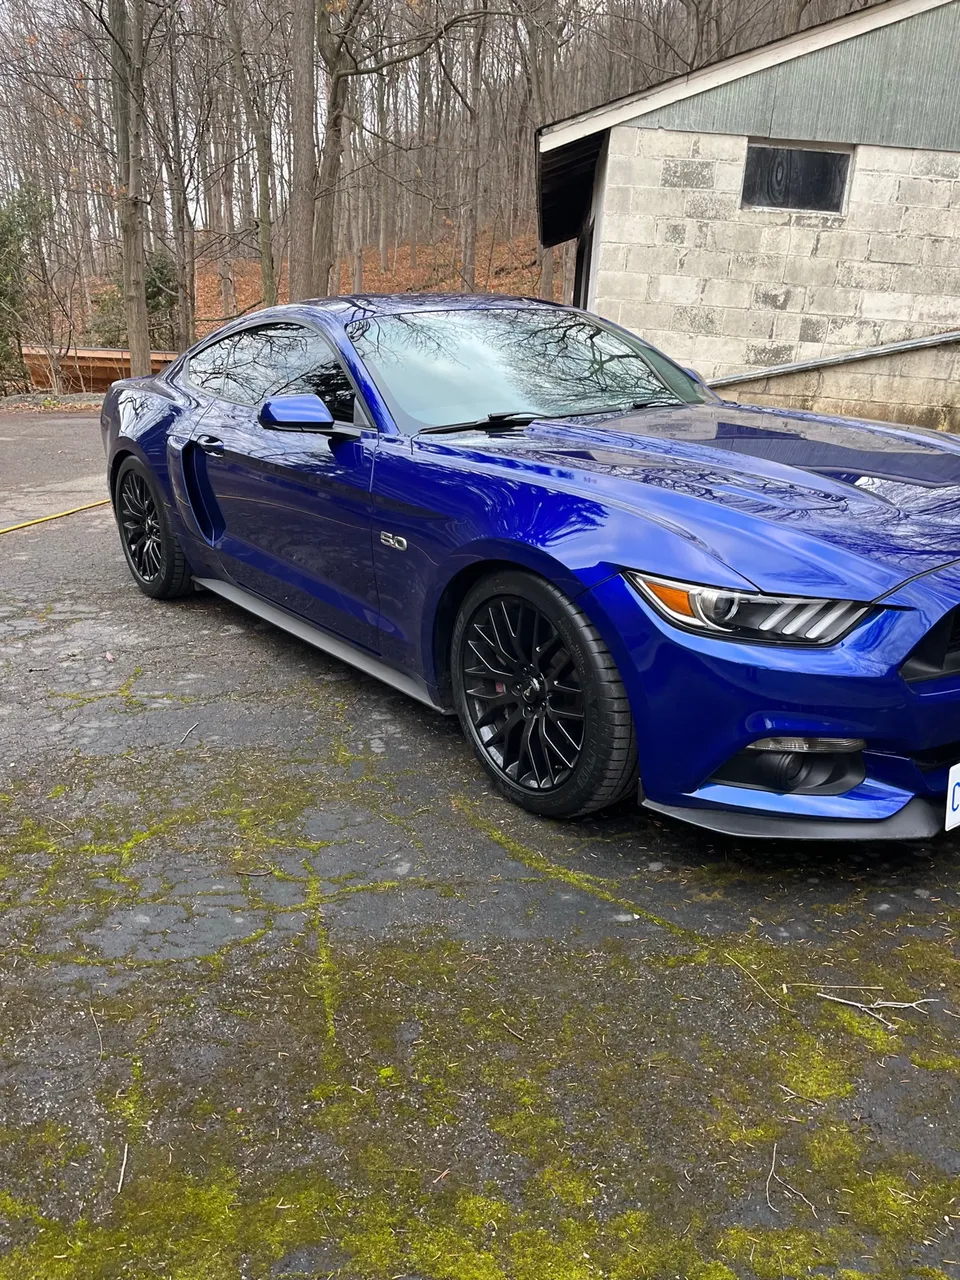 2016 mustang GT Performance 5.0